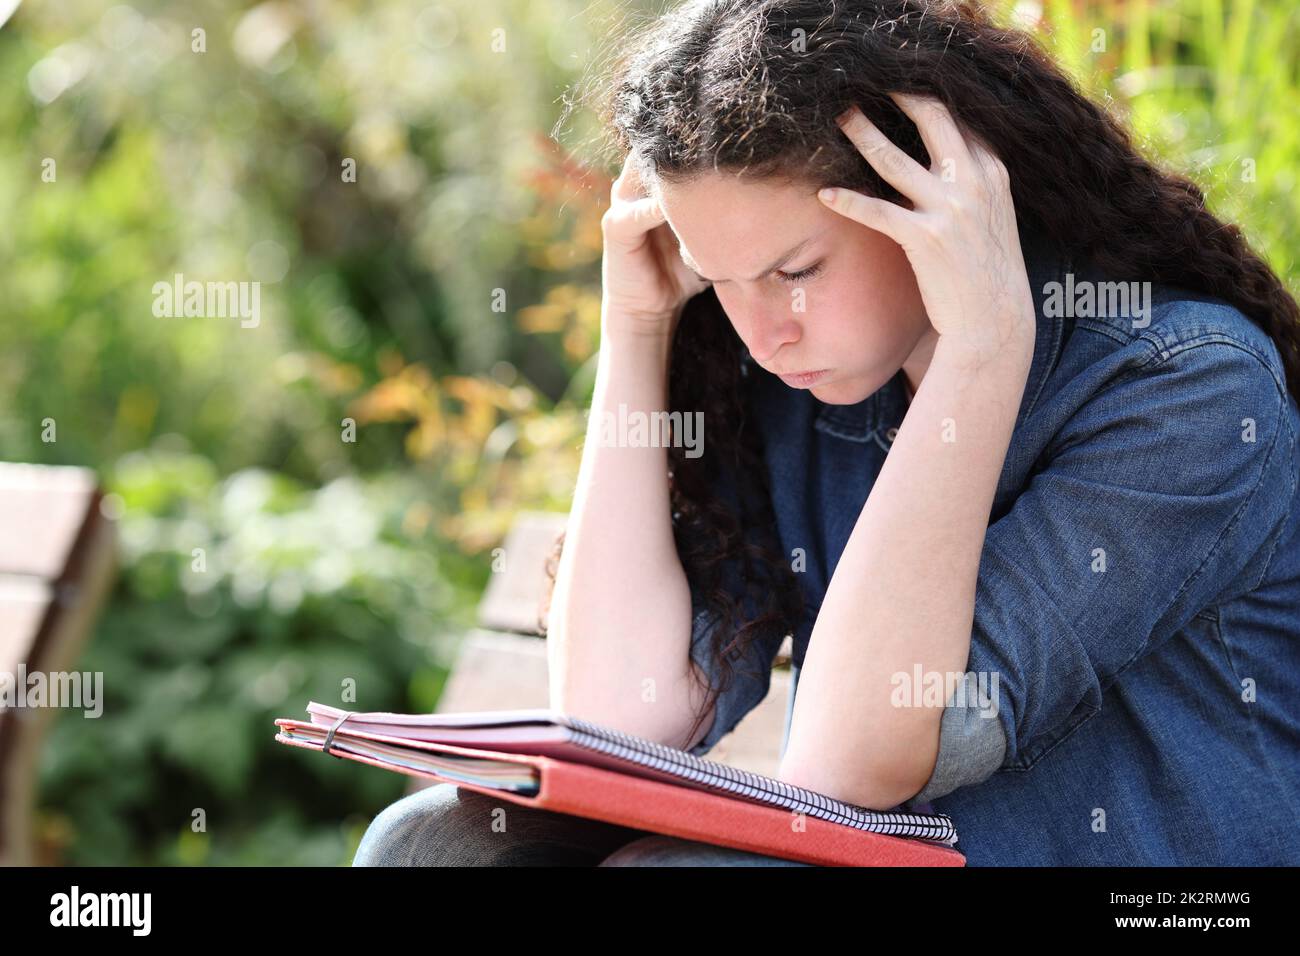 Frustrated student trying to understand lesson in a park Stock Photo